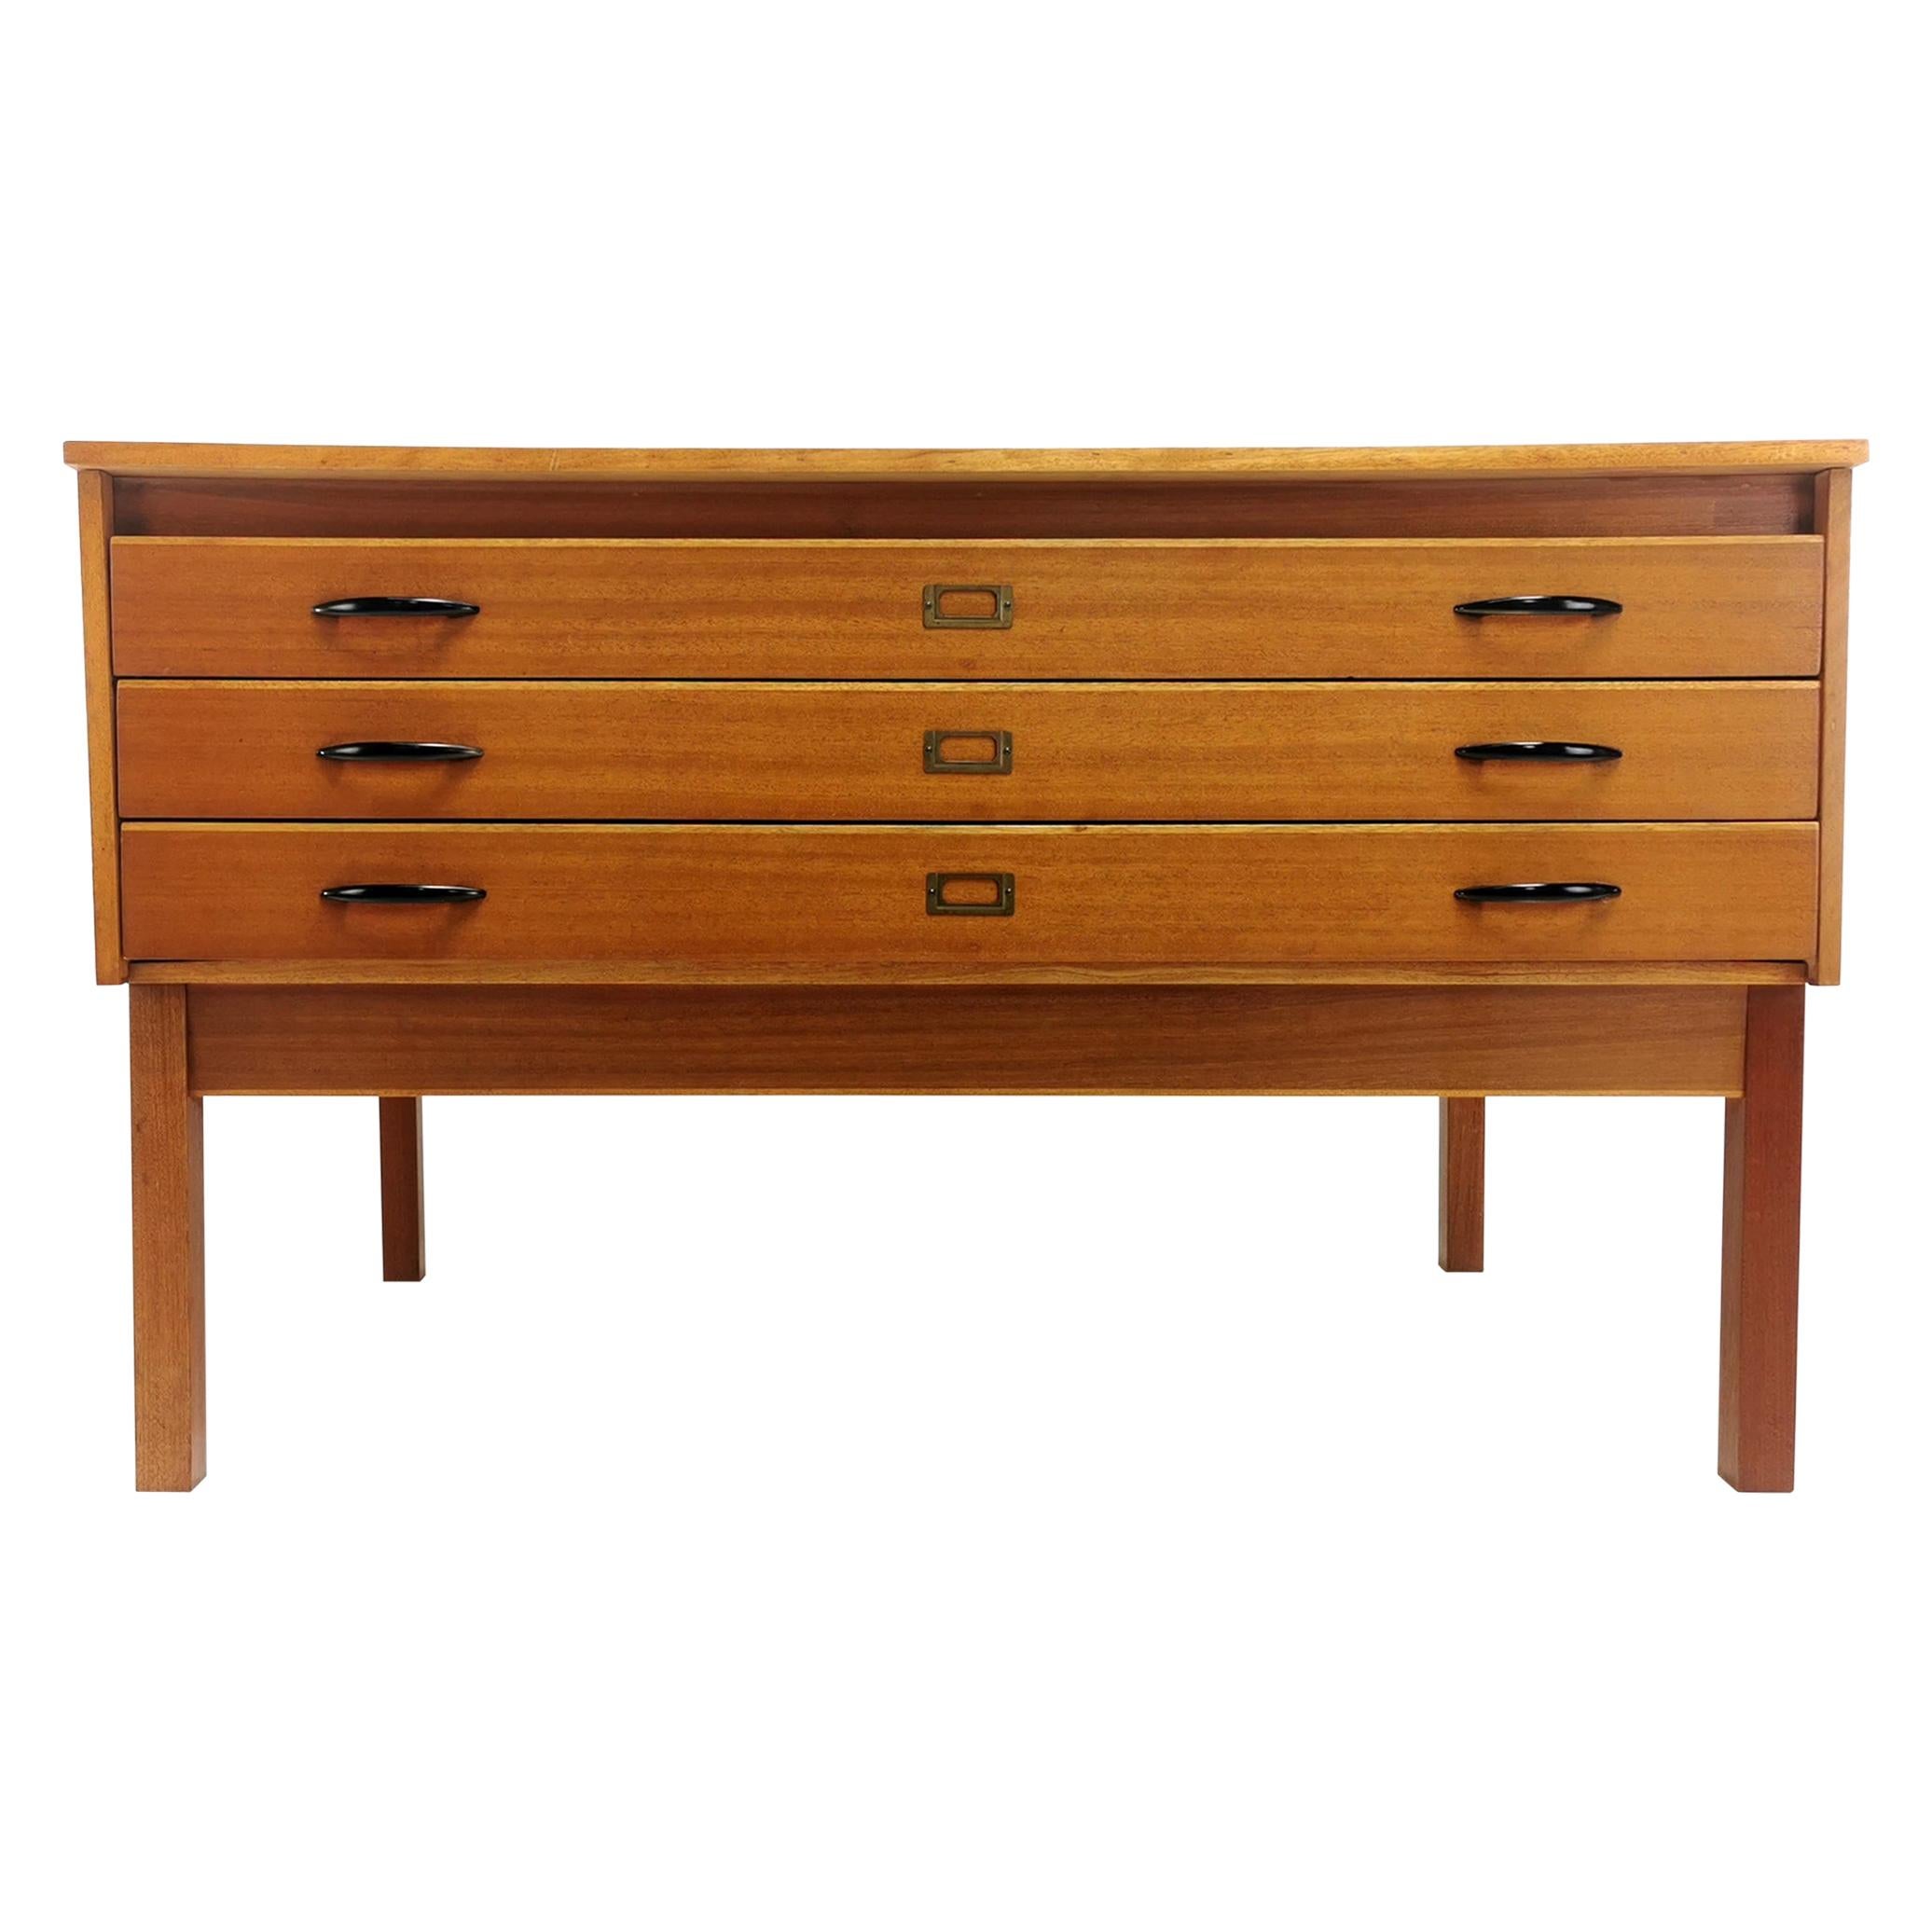 Vintage Teak Plan Chest of Drawers Artists Map Table Midcentury